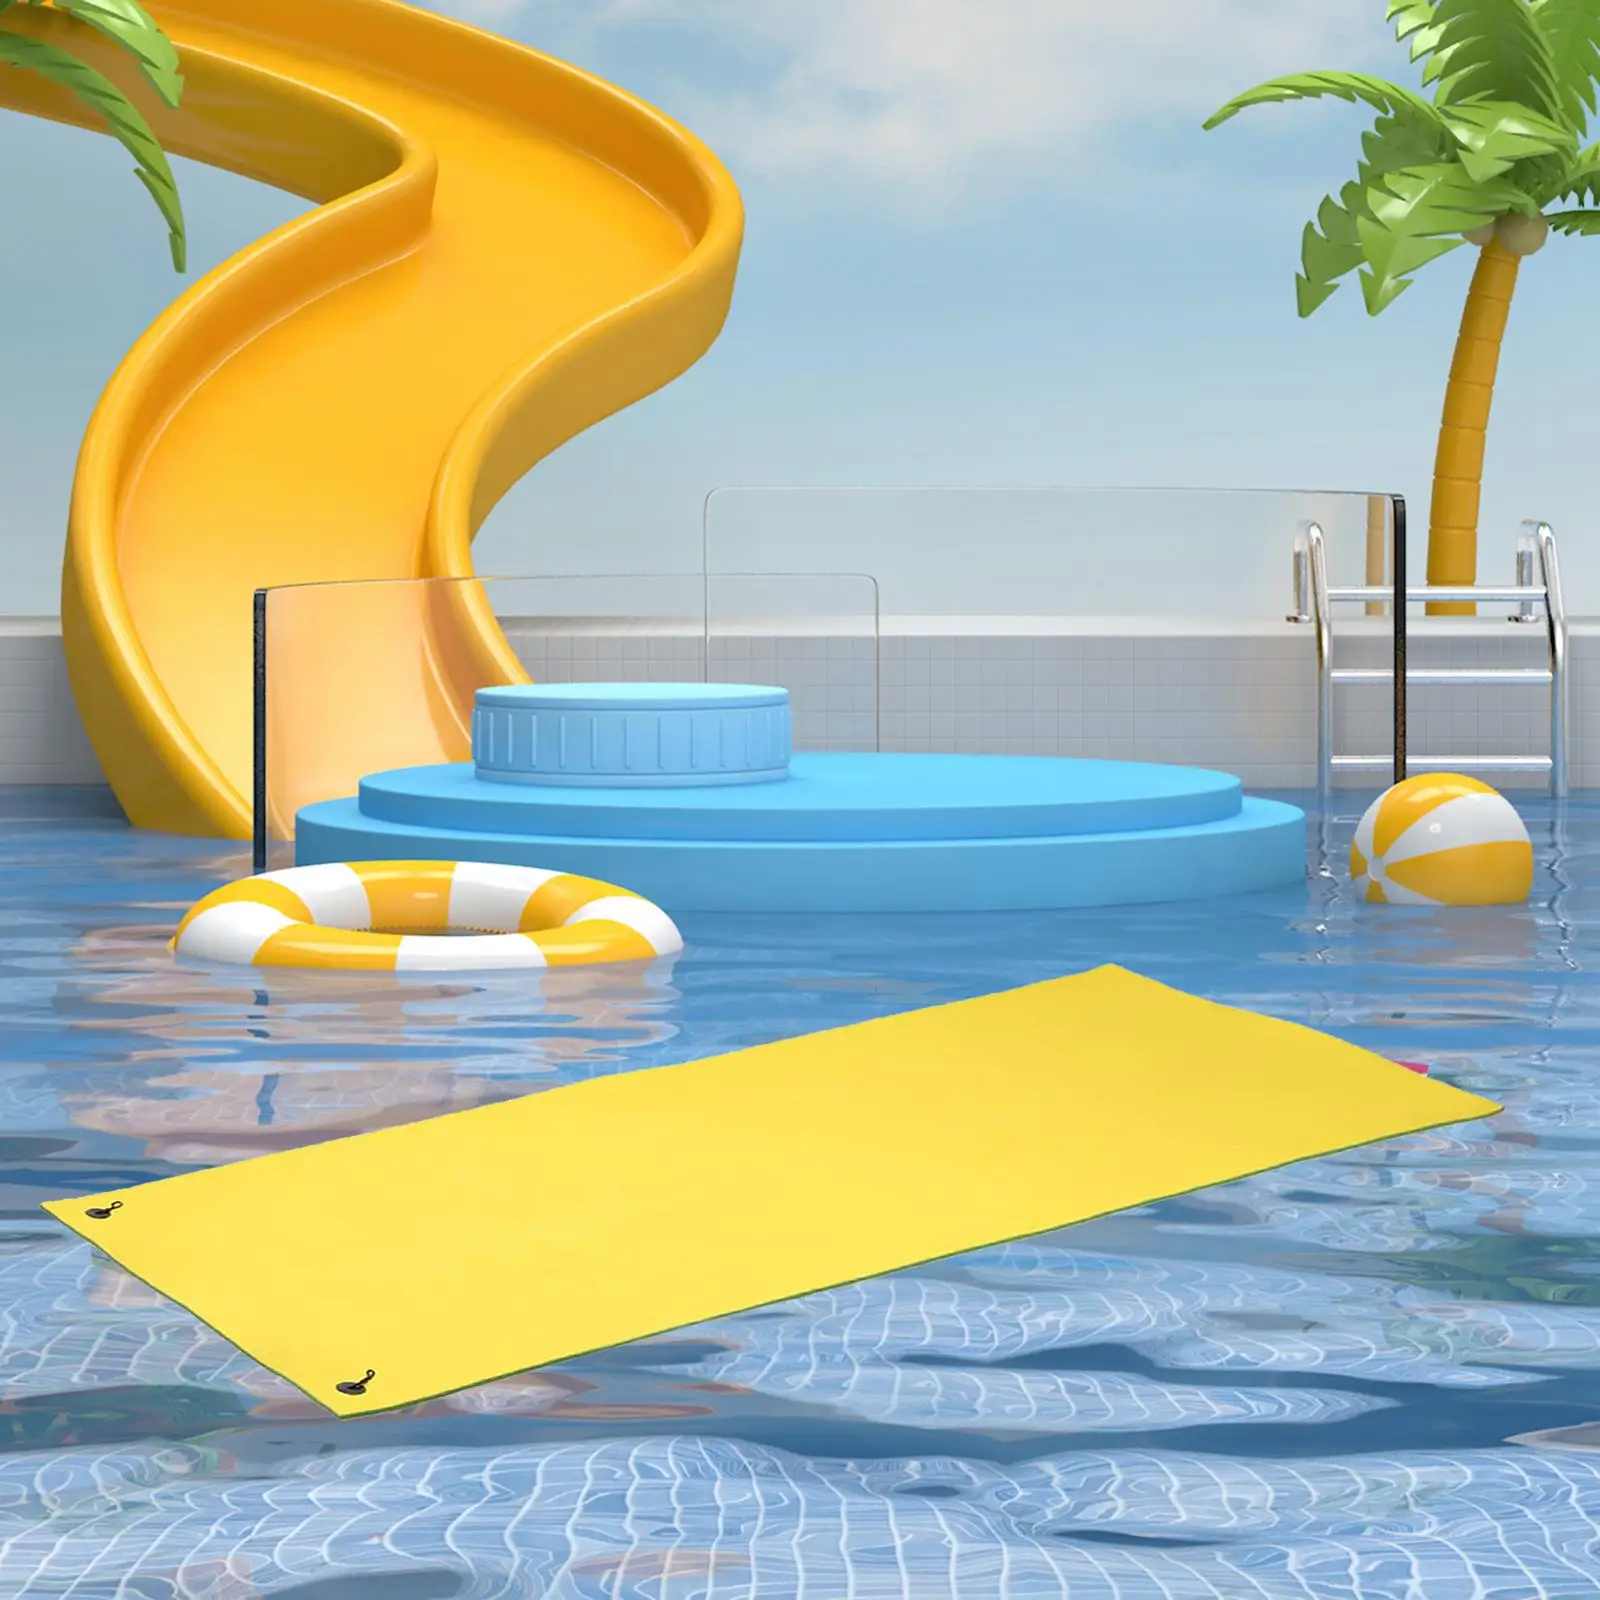 Pool Water Floating Mat 3 Layer Water Raft 270x90x3.3cm Simple to Clean with Soap and Water for Relaxing Portable Water Bed